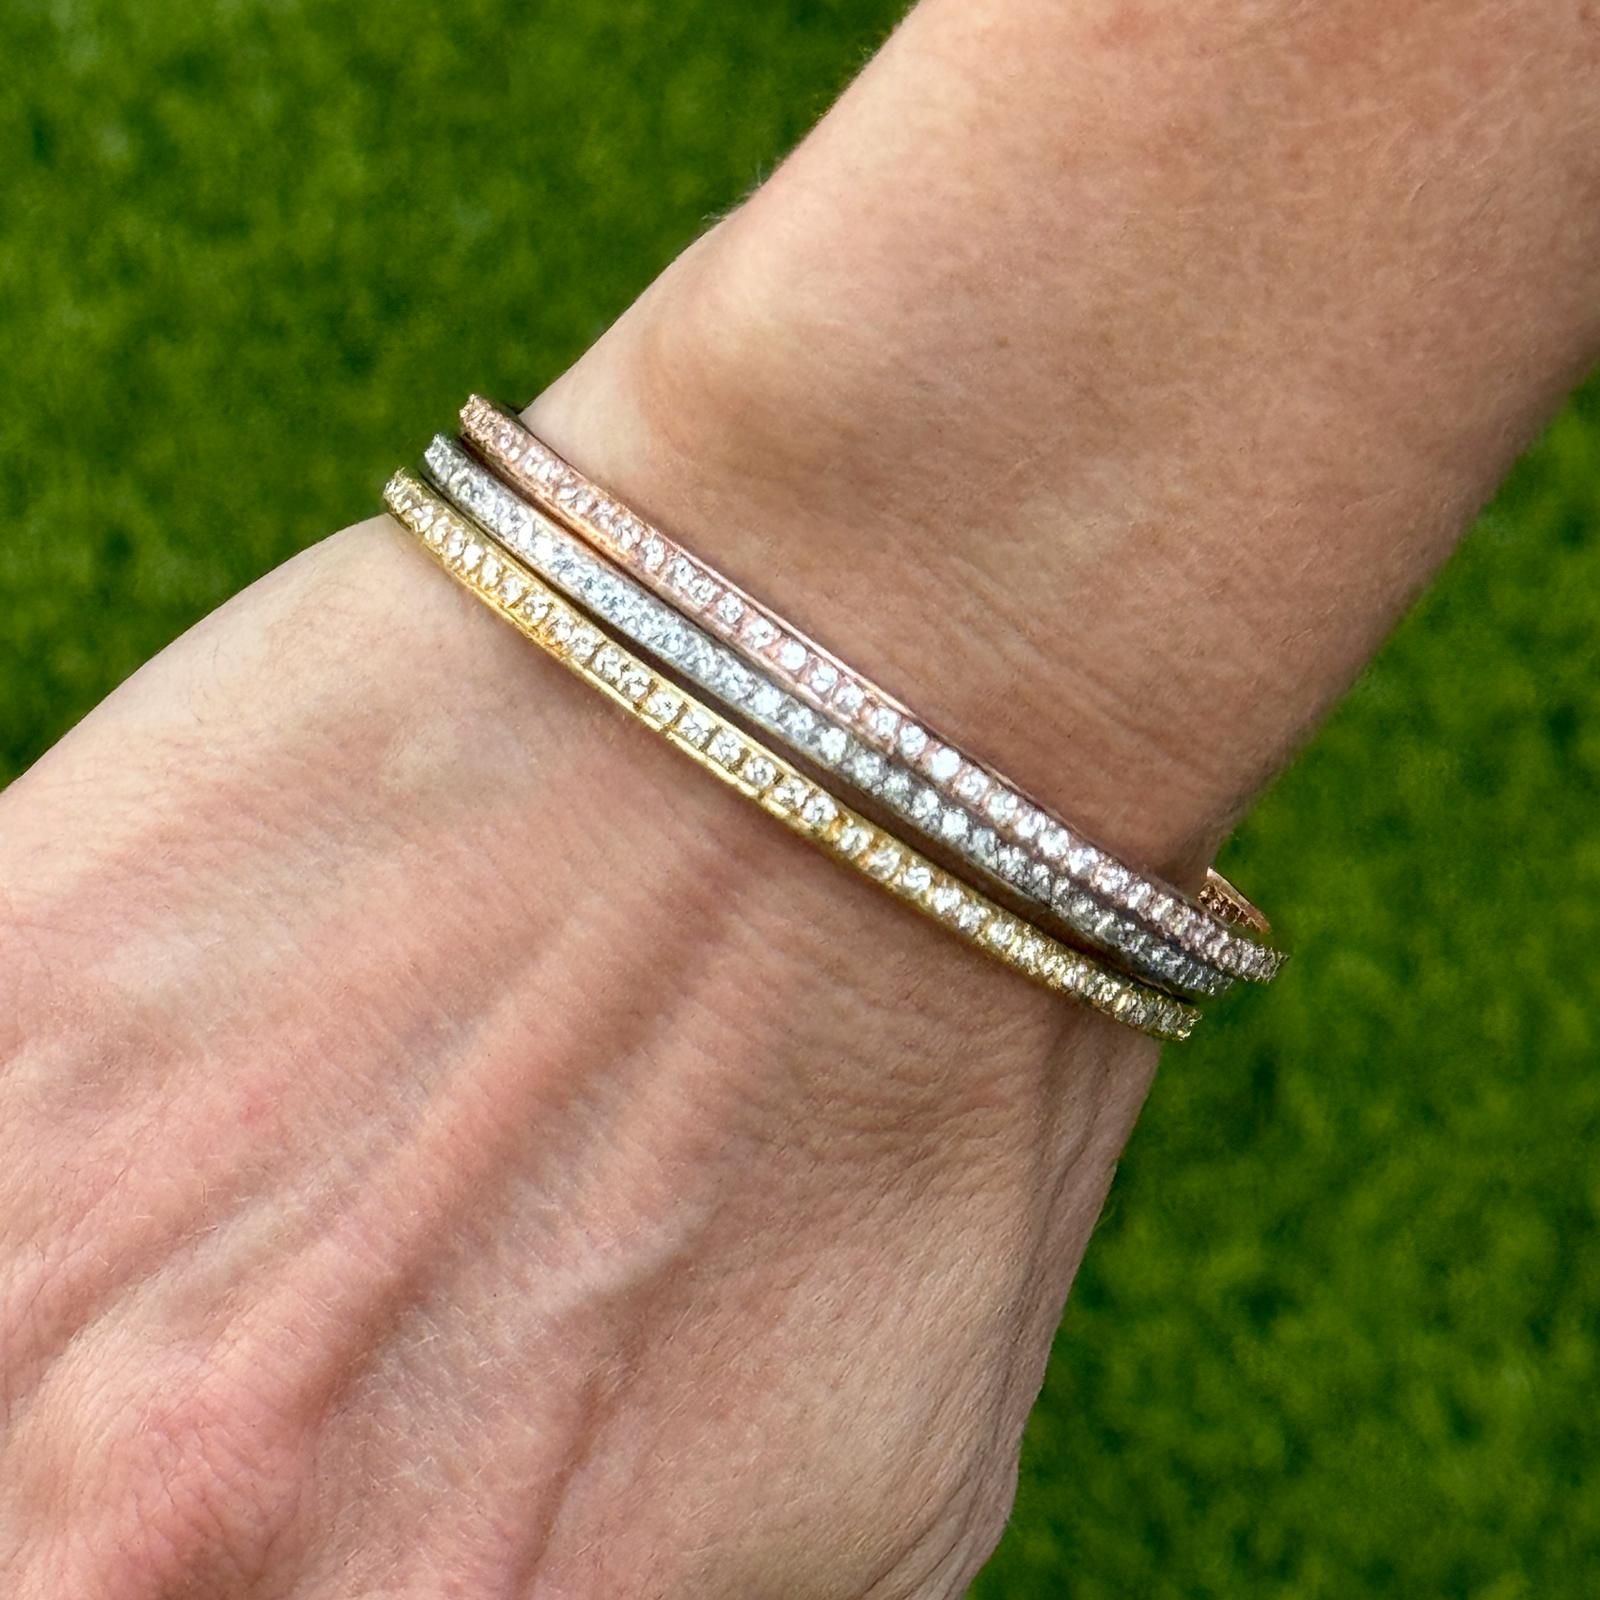 Set of three modern diamond bangle bracelets crafted in 18 karat yellow, white , and rose gold. The bangles are set all the way around with round brilliant cut diamonds weighing 6.30 carat total weight. The diamonds are graded F-H color and VS2-SI1